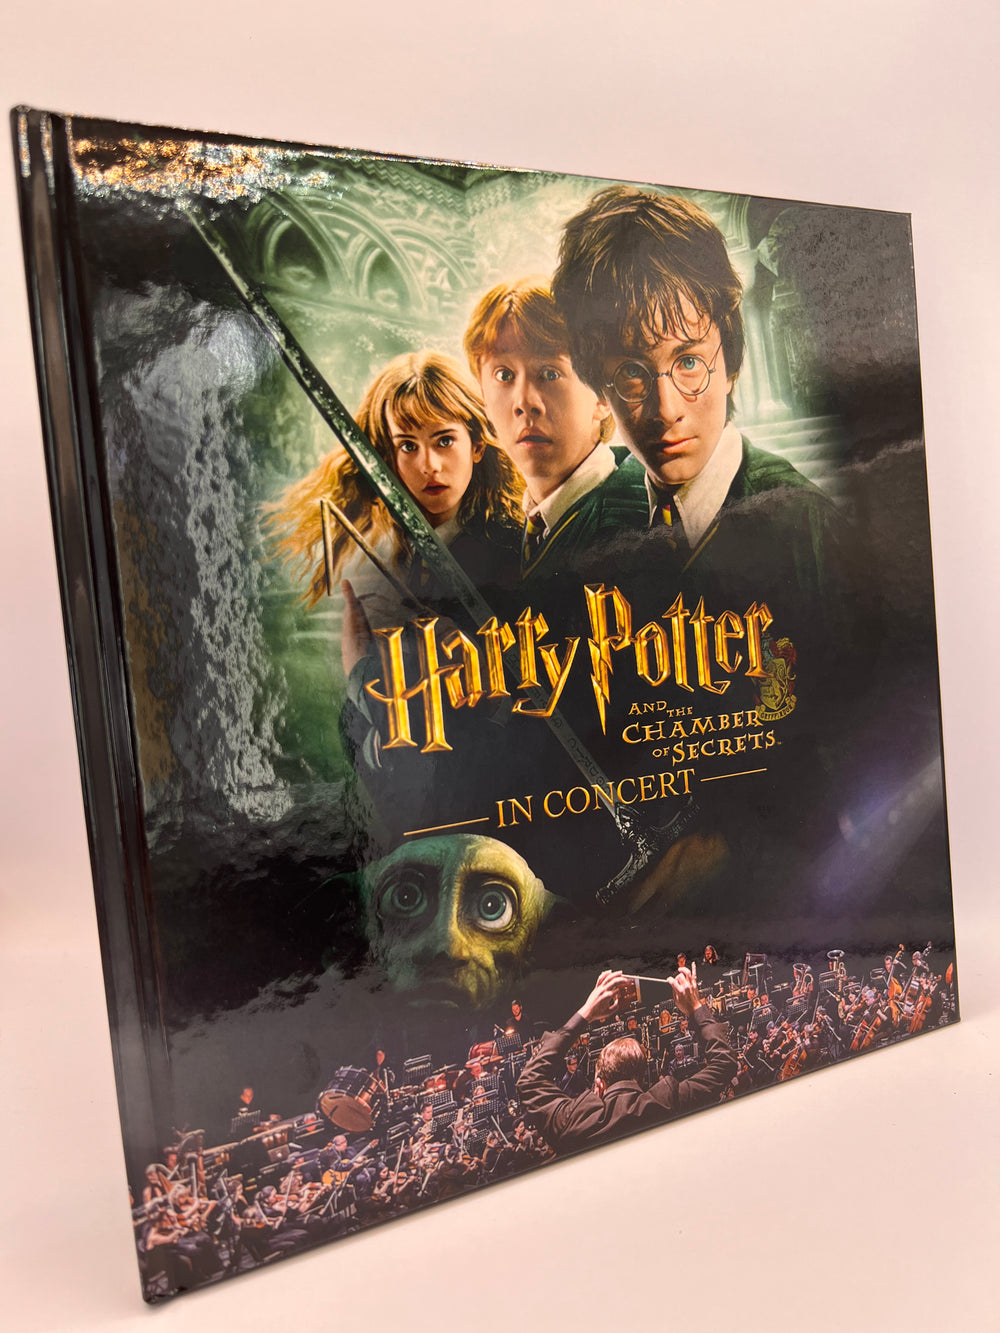 Harry Potter and the Chamber of Secrets™ in Concert Hardcover Program Book